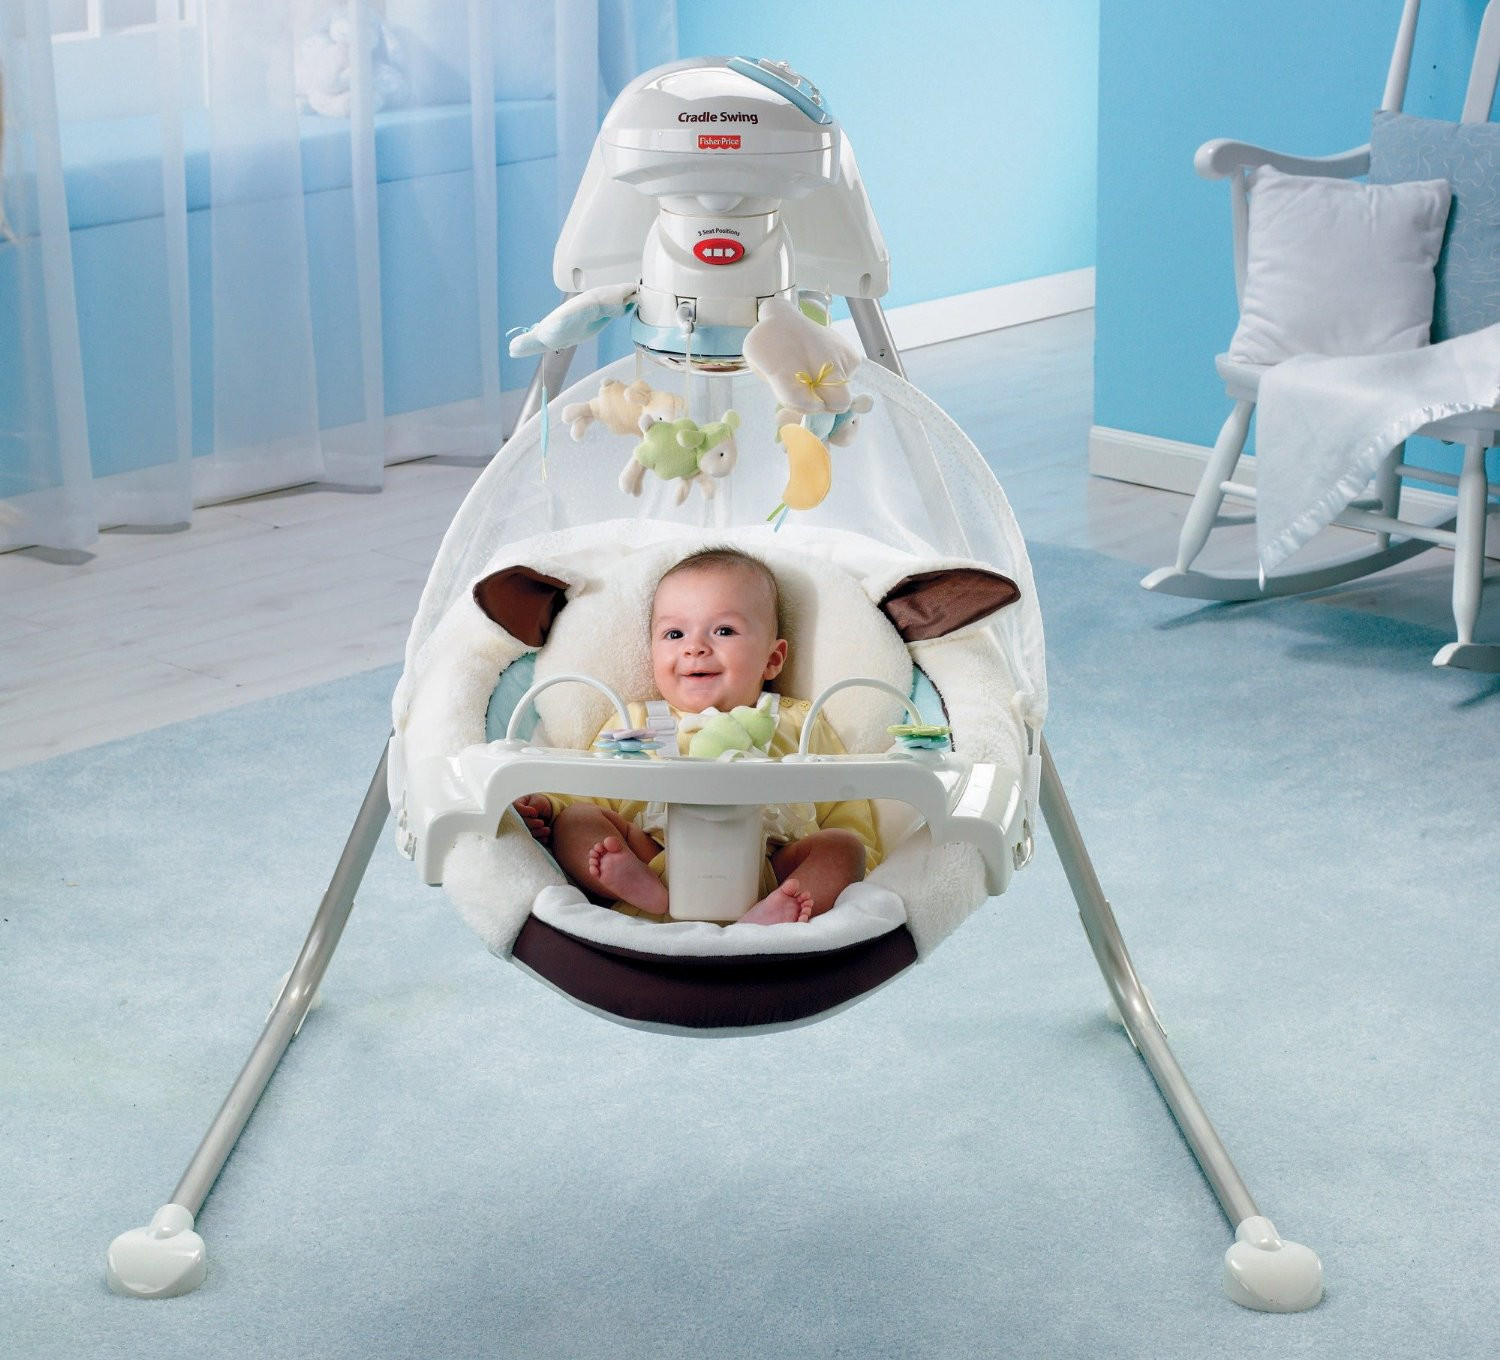 Best ideas about Best Baby Swing
. Save or Pin Image baby swing for your child – babyswingforchilds Now.